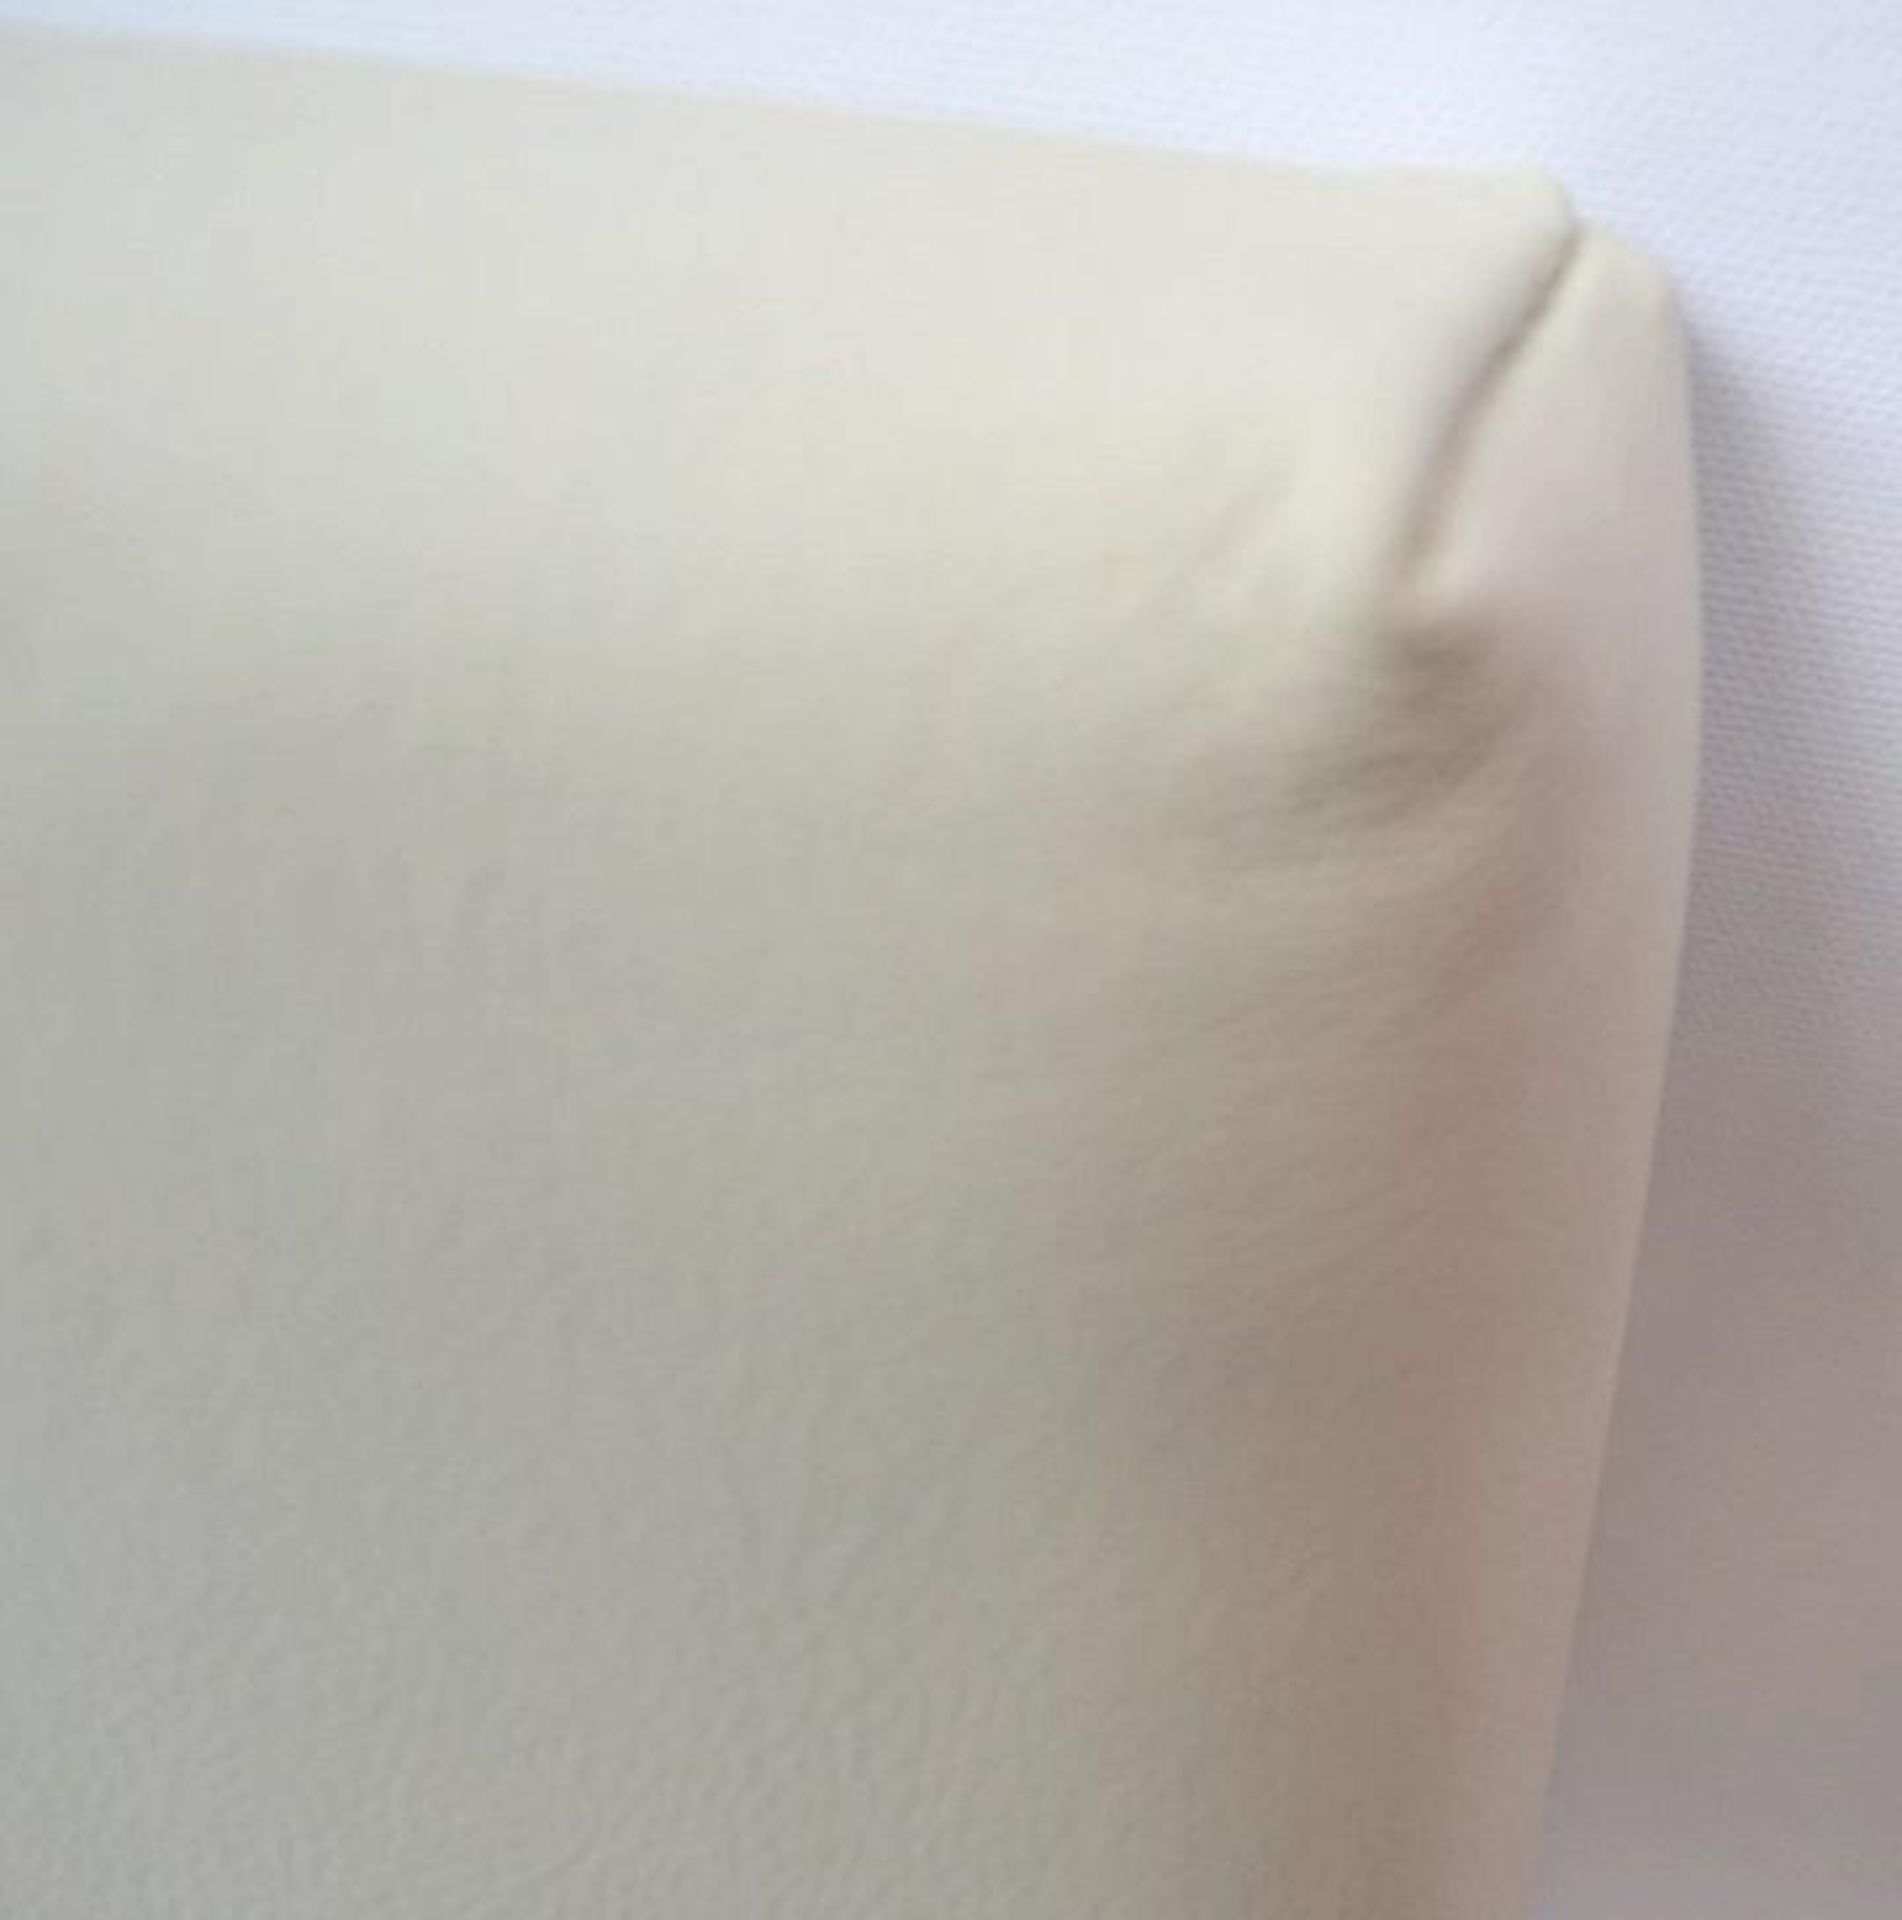 1 x REFLEX Seat Back, Upholstered In Cream Leather - Dimensions: 45.5 x 44.5 x 5cm - Ref: 5130682 - - Image 3 of 10